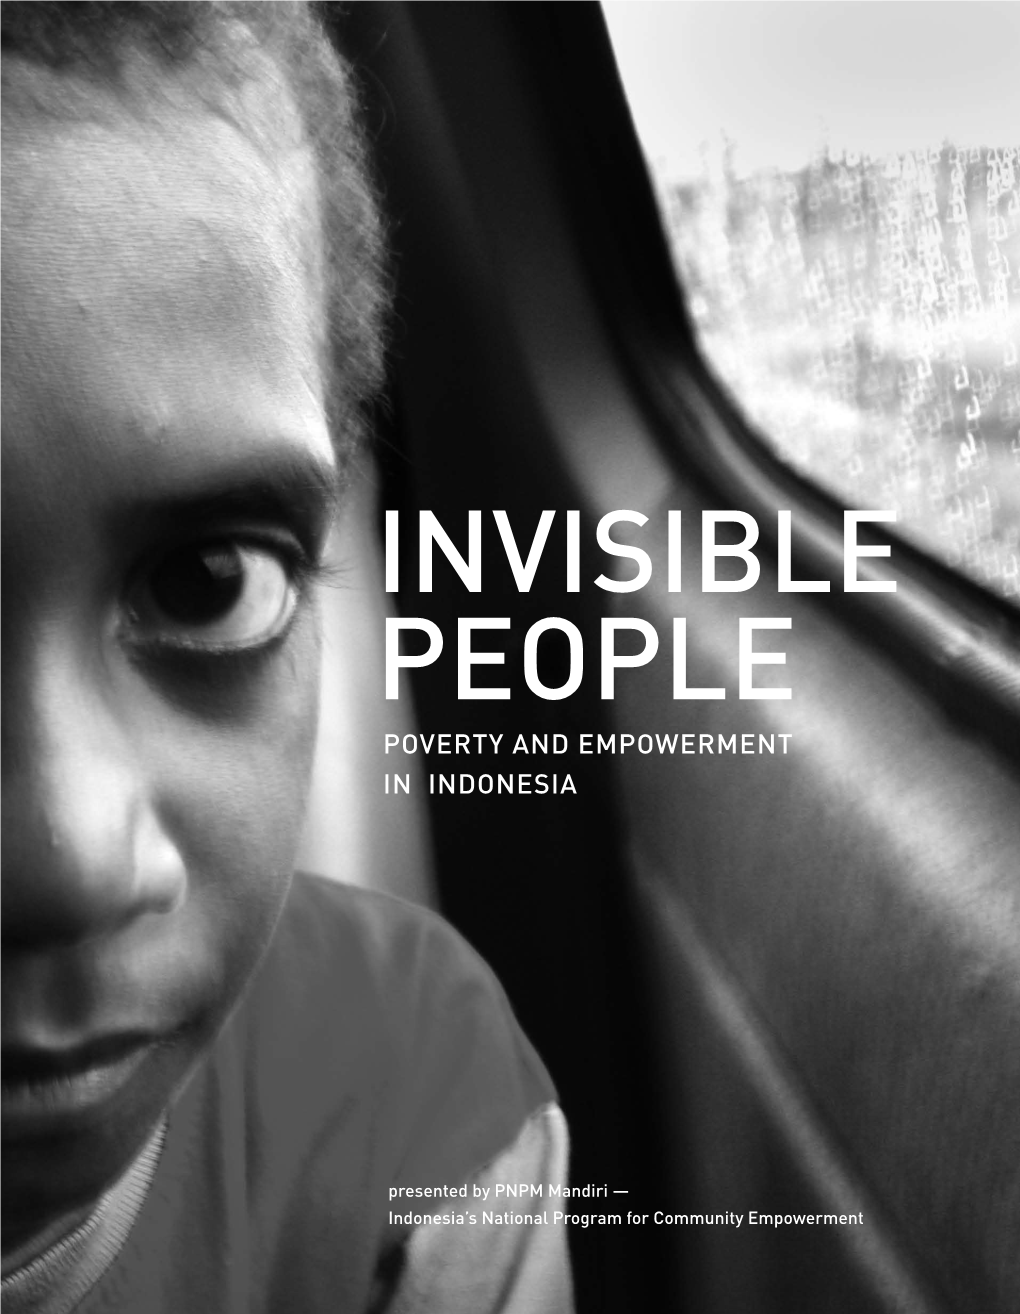 Poverty and Empowerment in Indonesia